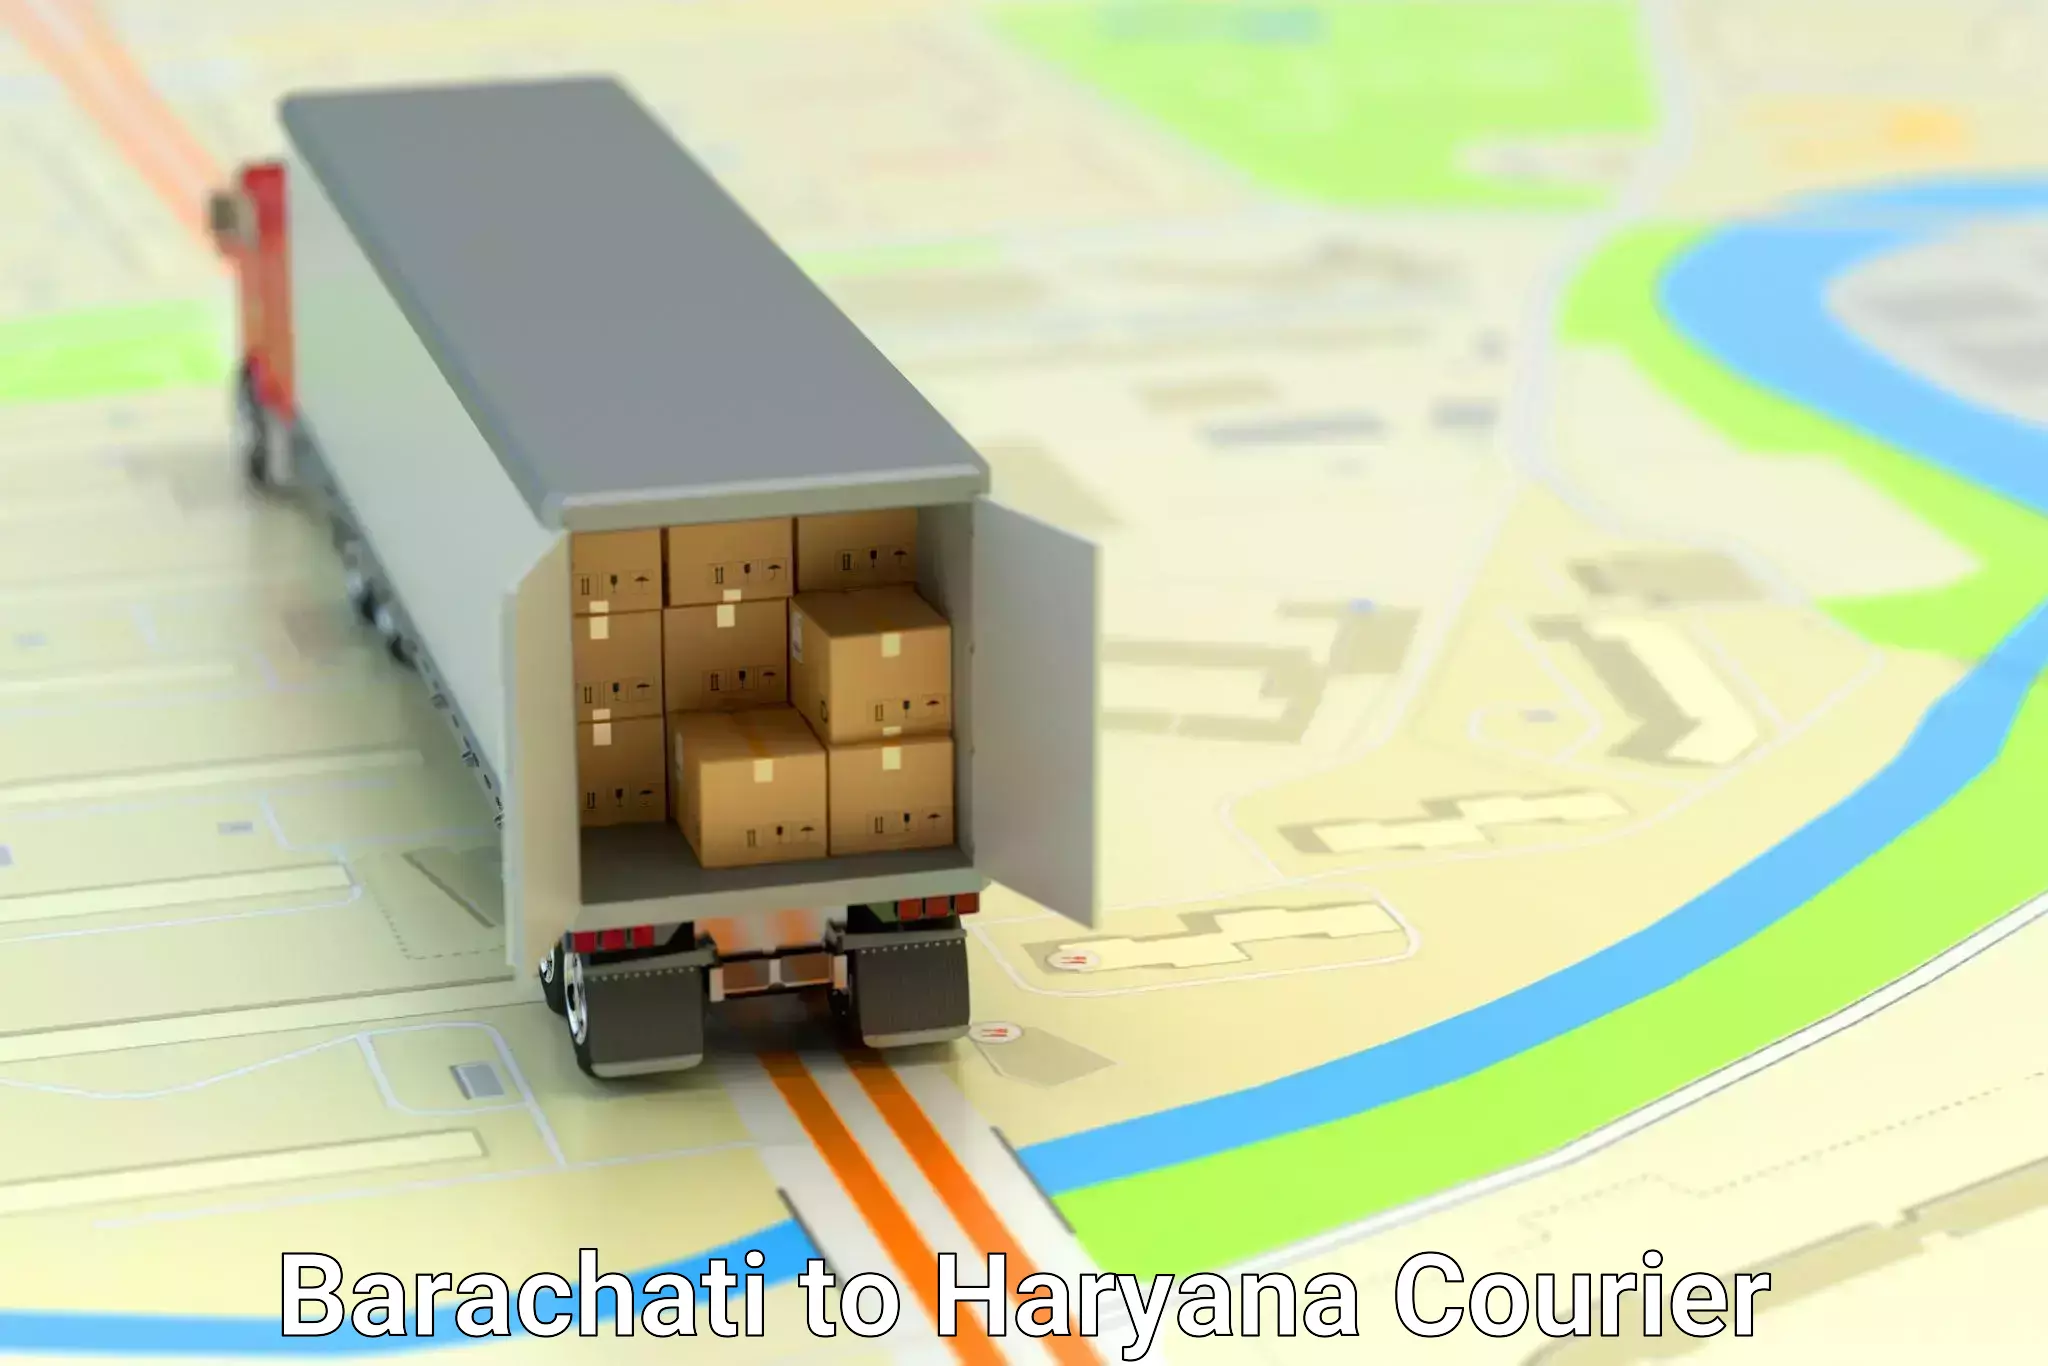 Residential moving experts Barachati to Haryana